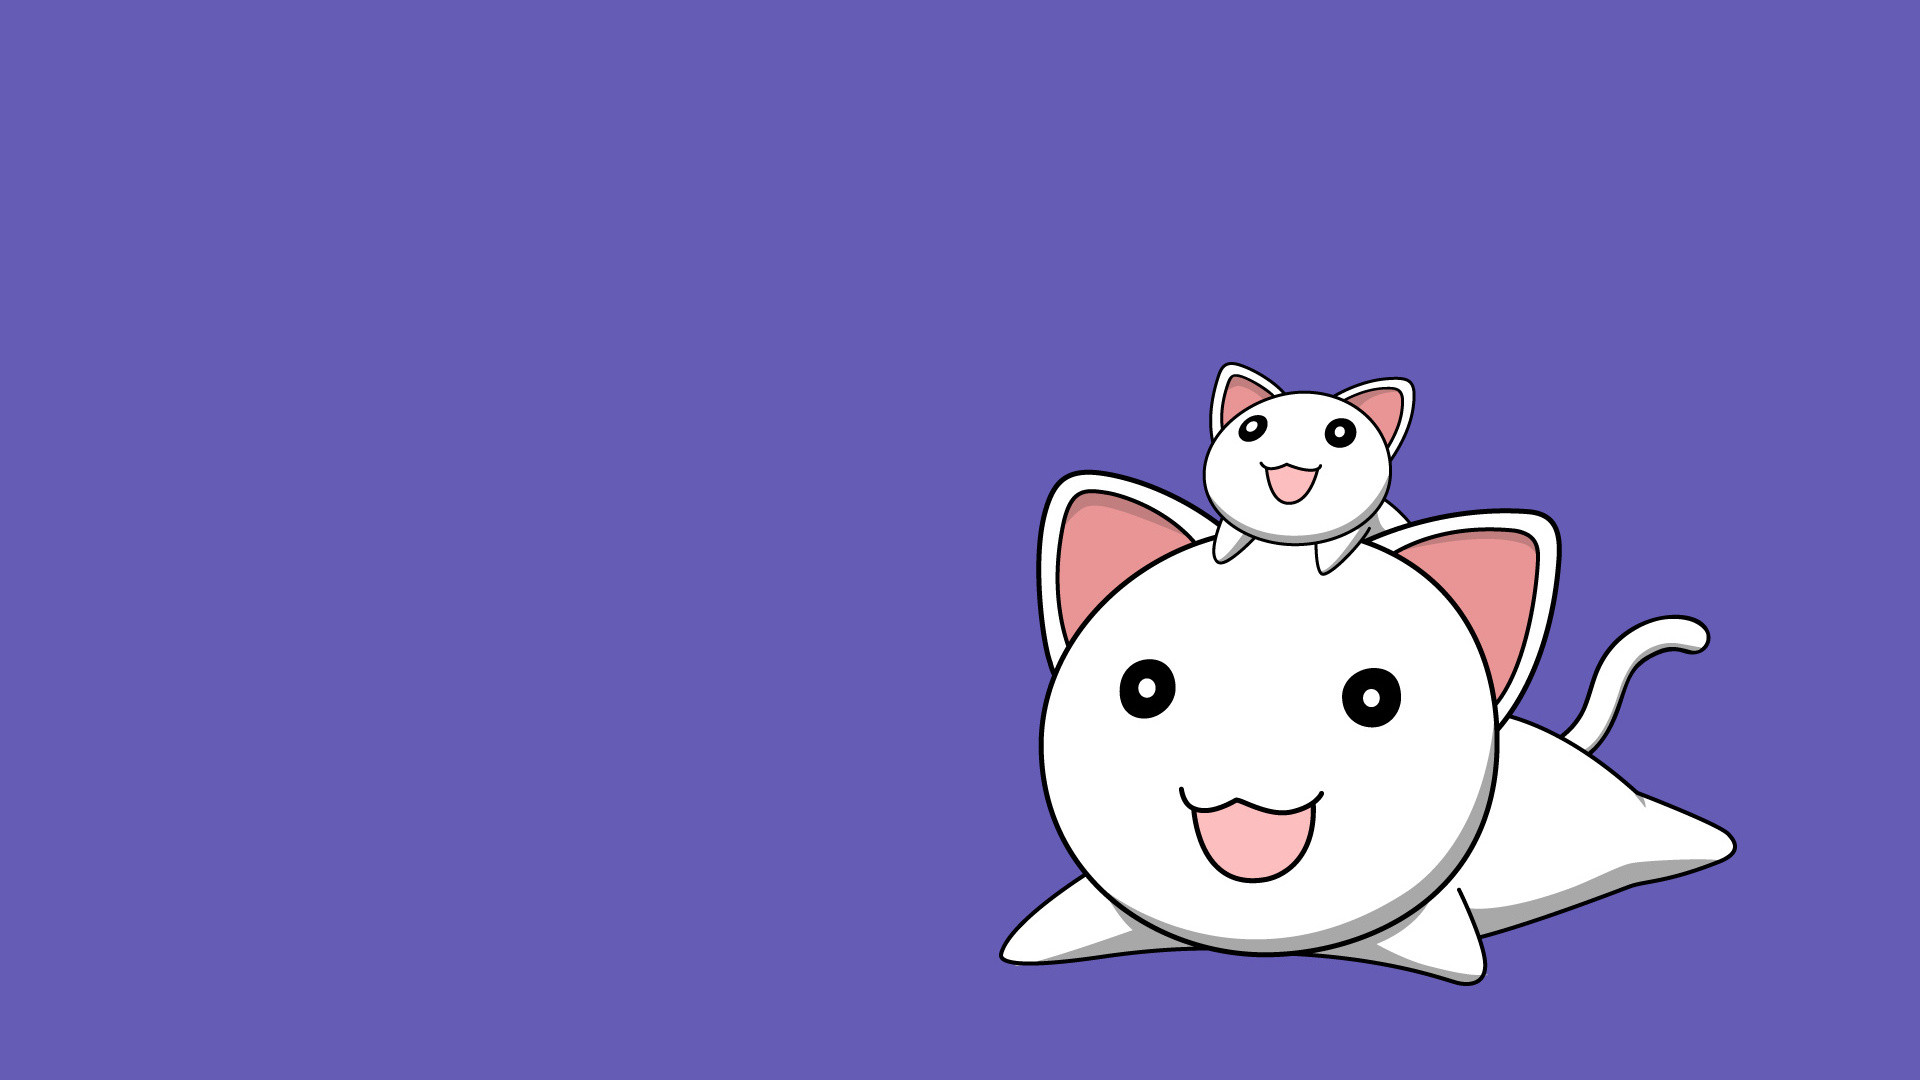 cute kitty cat anime wallpapers wallpaper cave on kawaii cat anime wallpapers